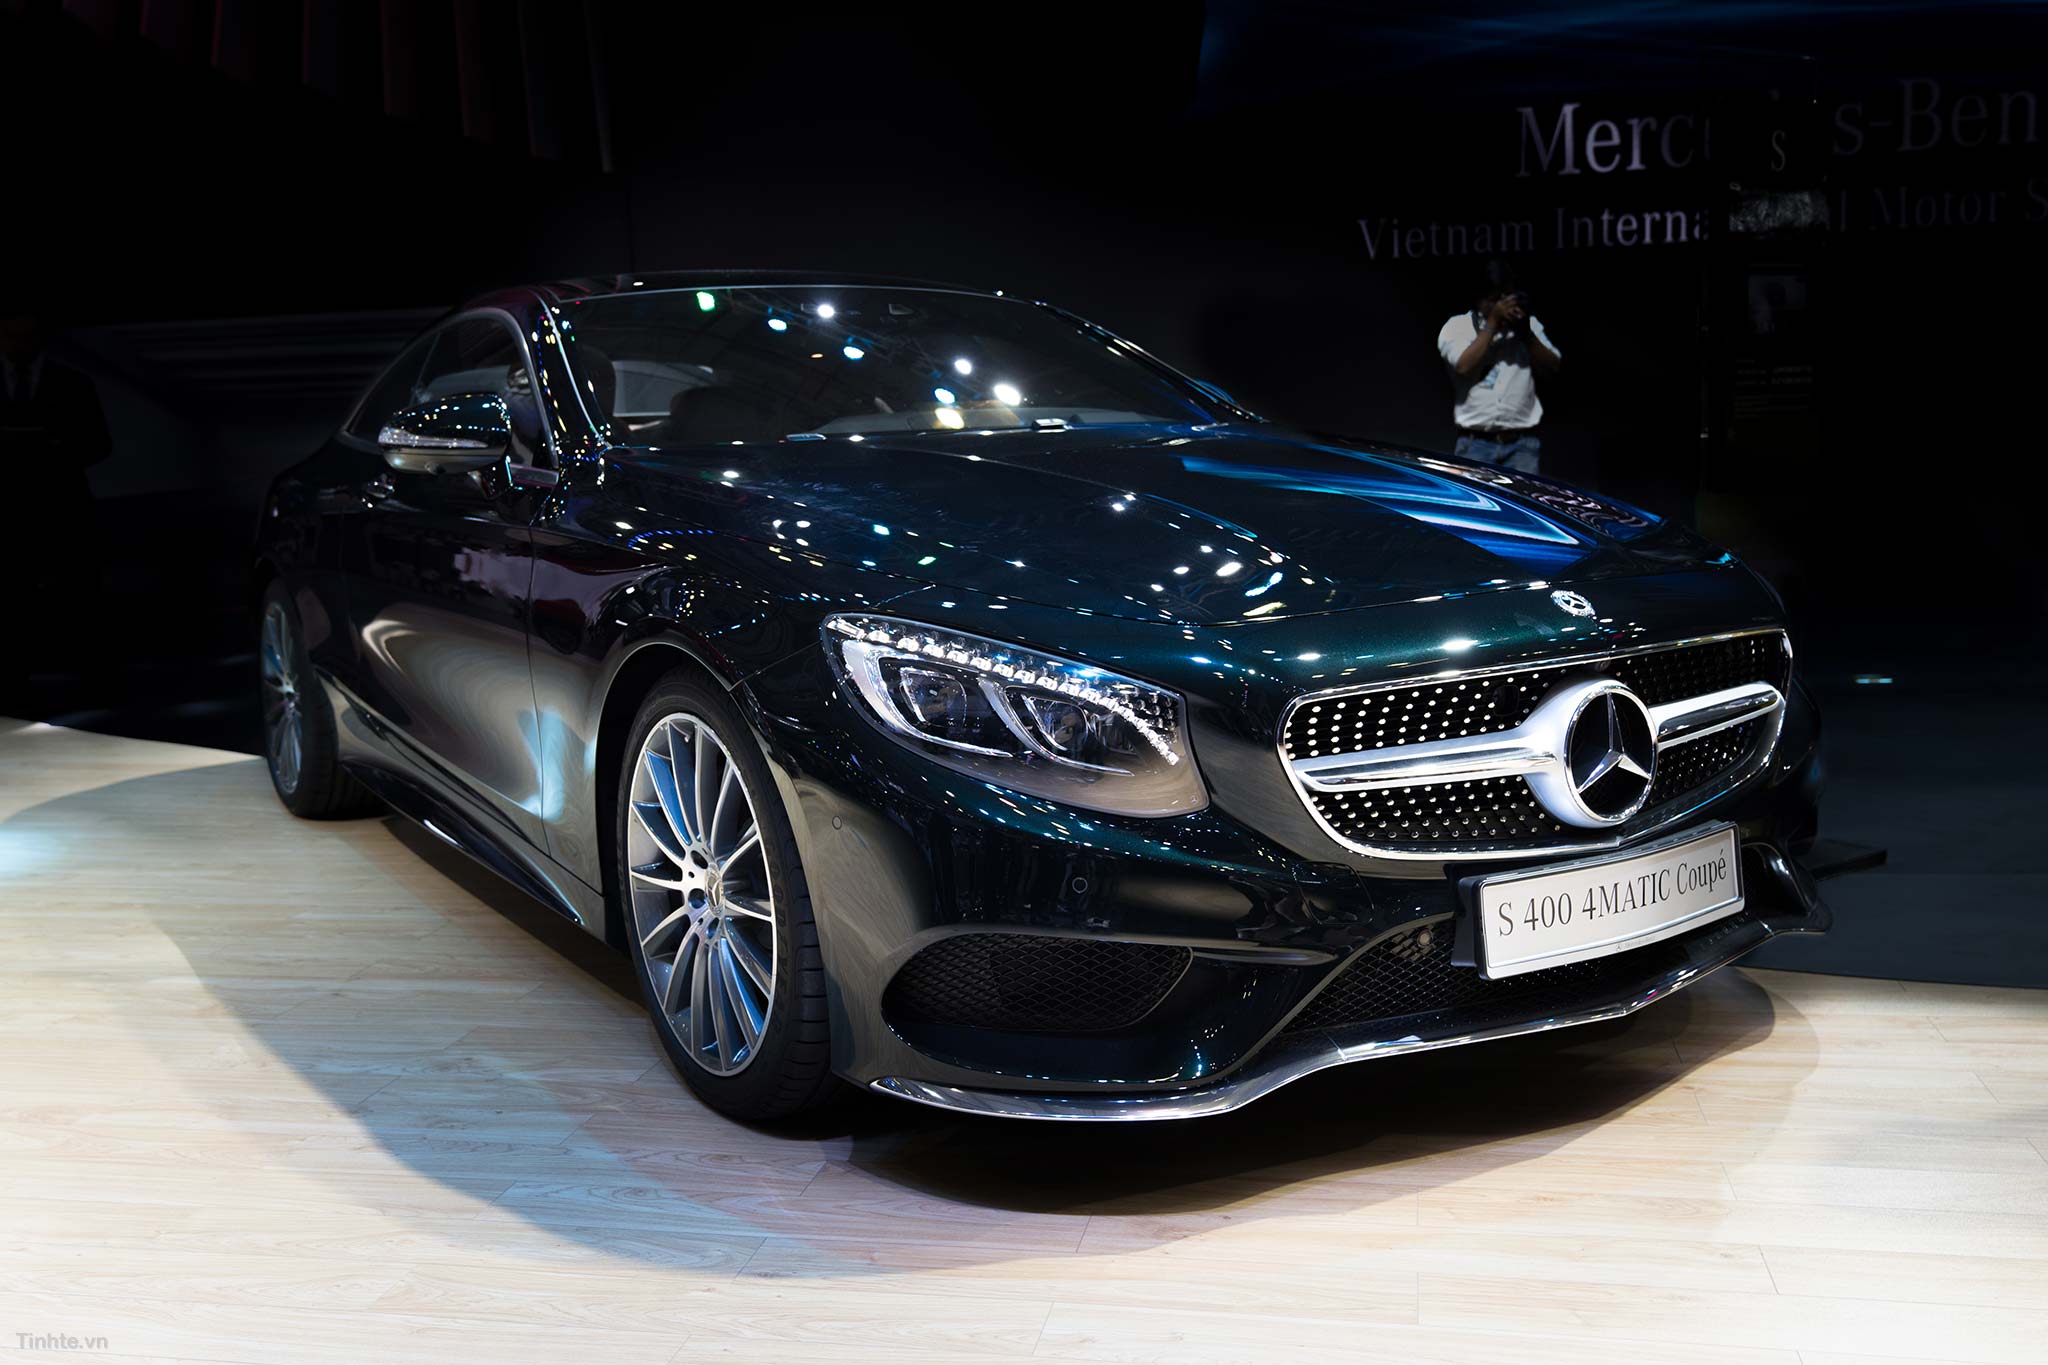 tinhte_mecmercedes_benz_s400_coupe_2.jpg